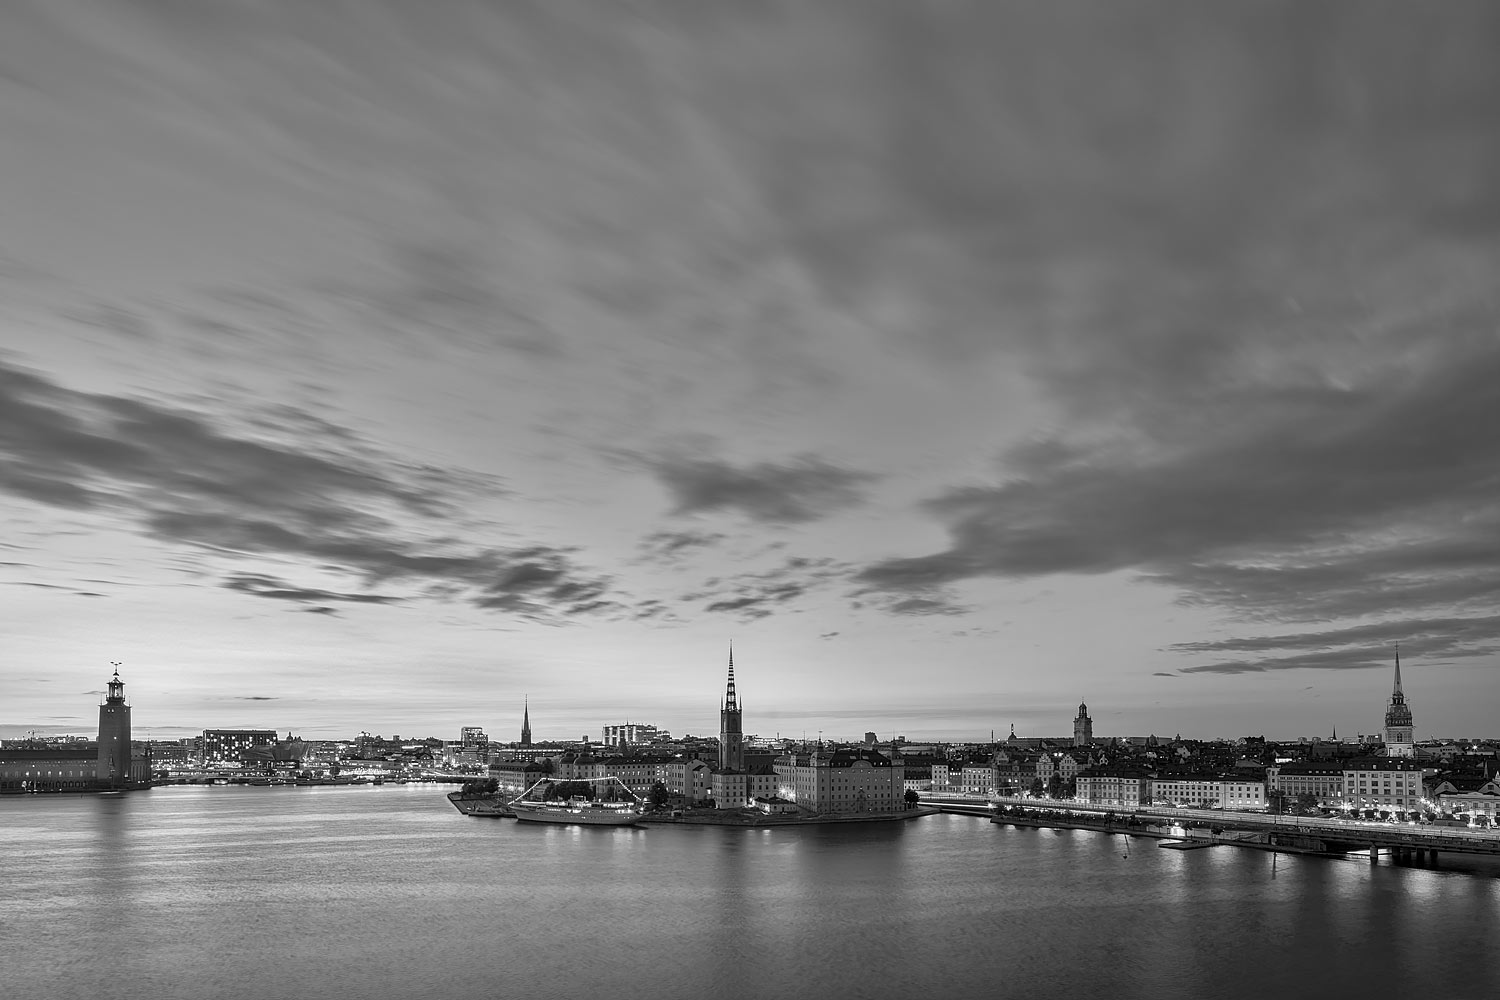 Stockholm, Sweden - Evening Panorama of the City in Black and White